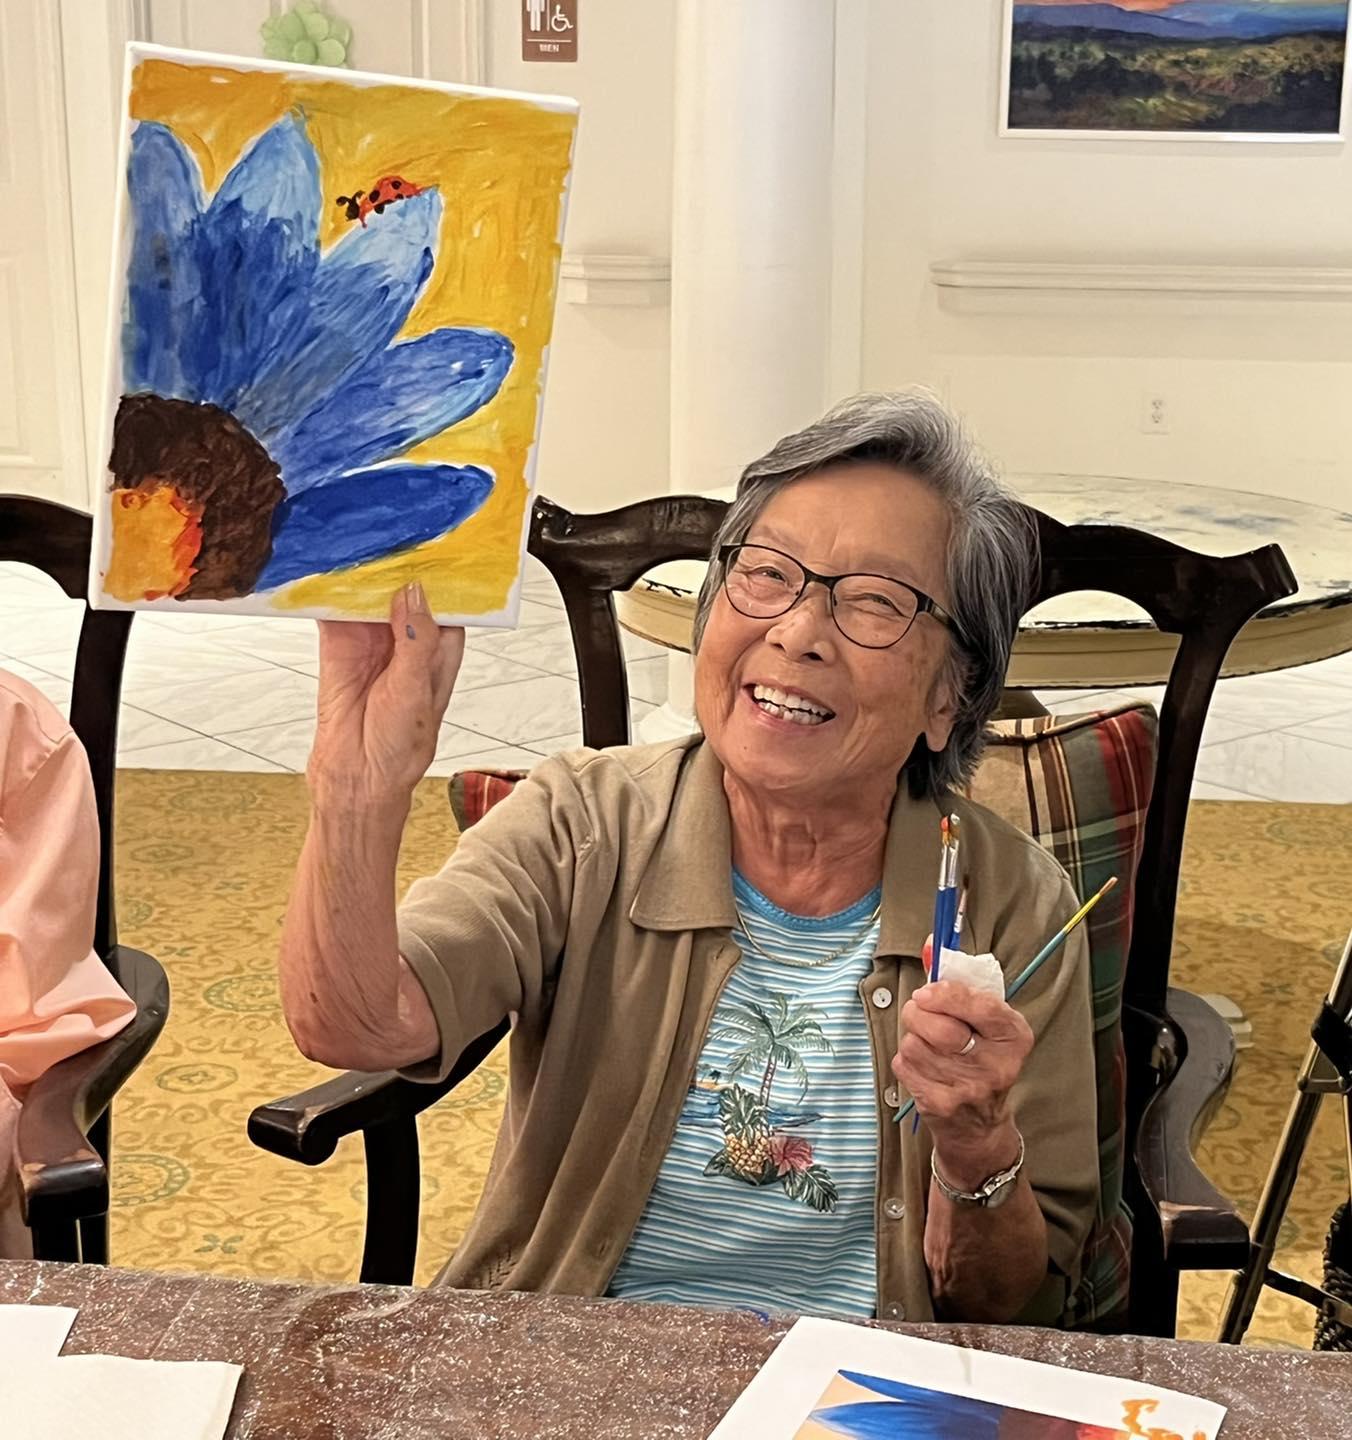 Older woman holding up a painting she made